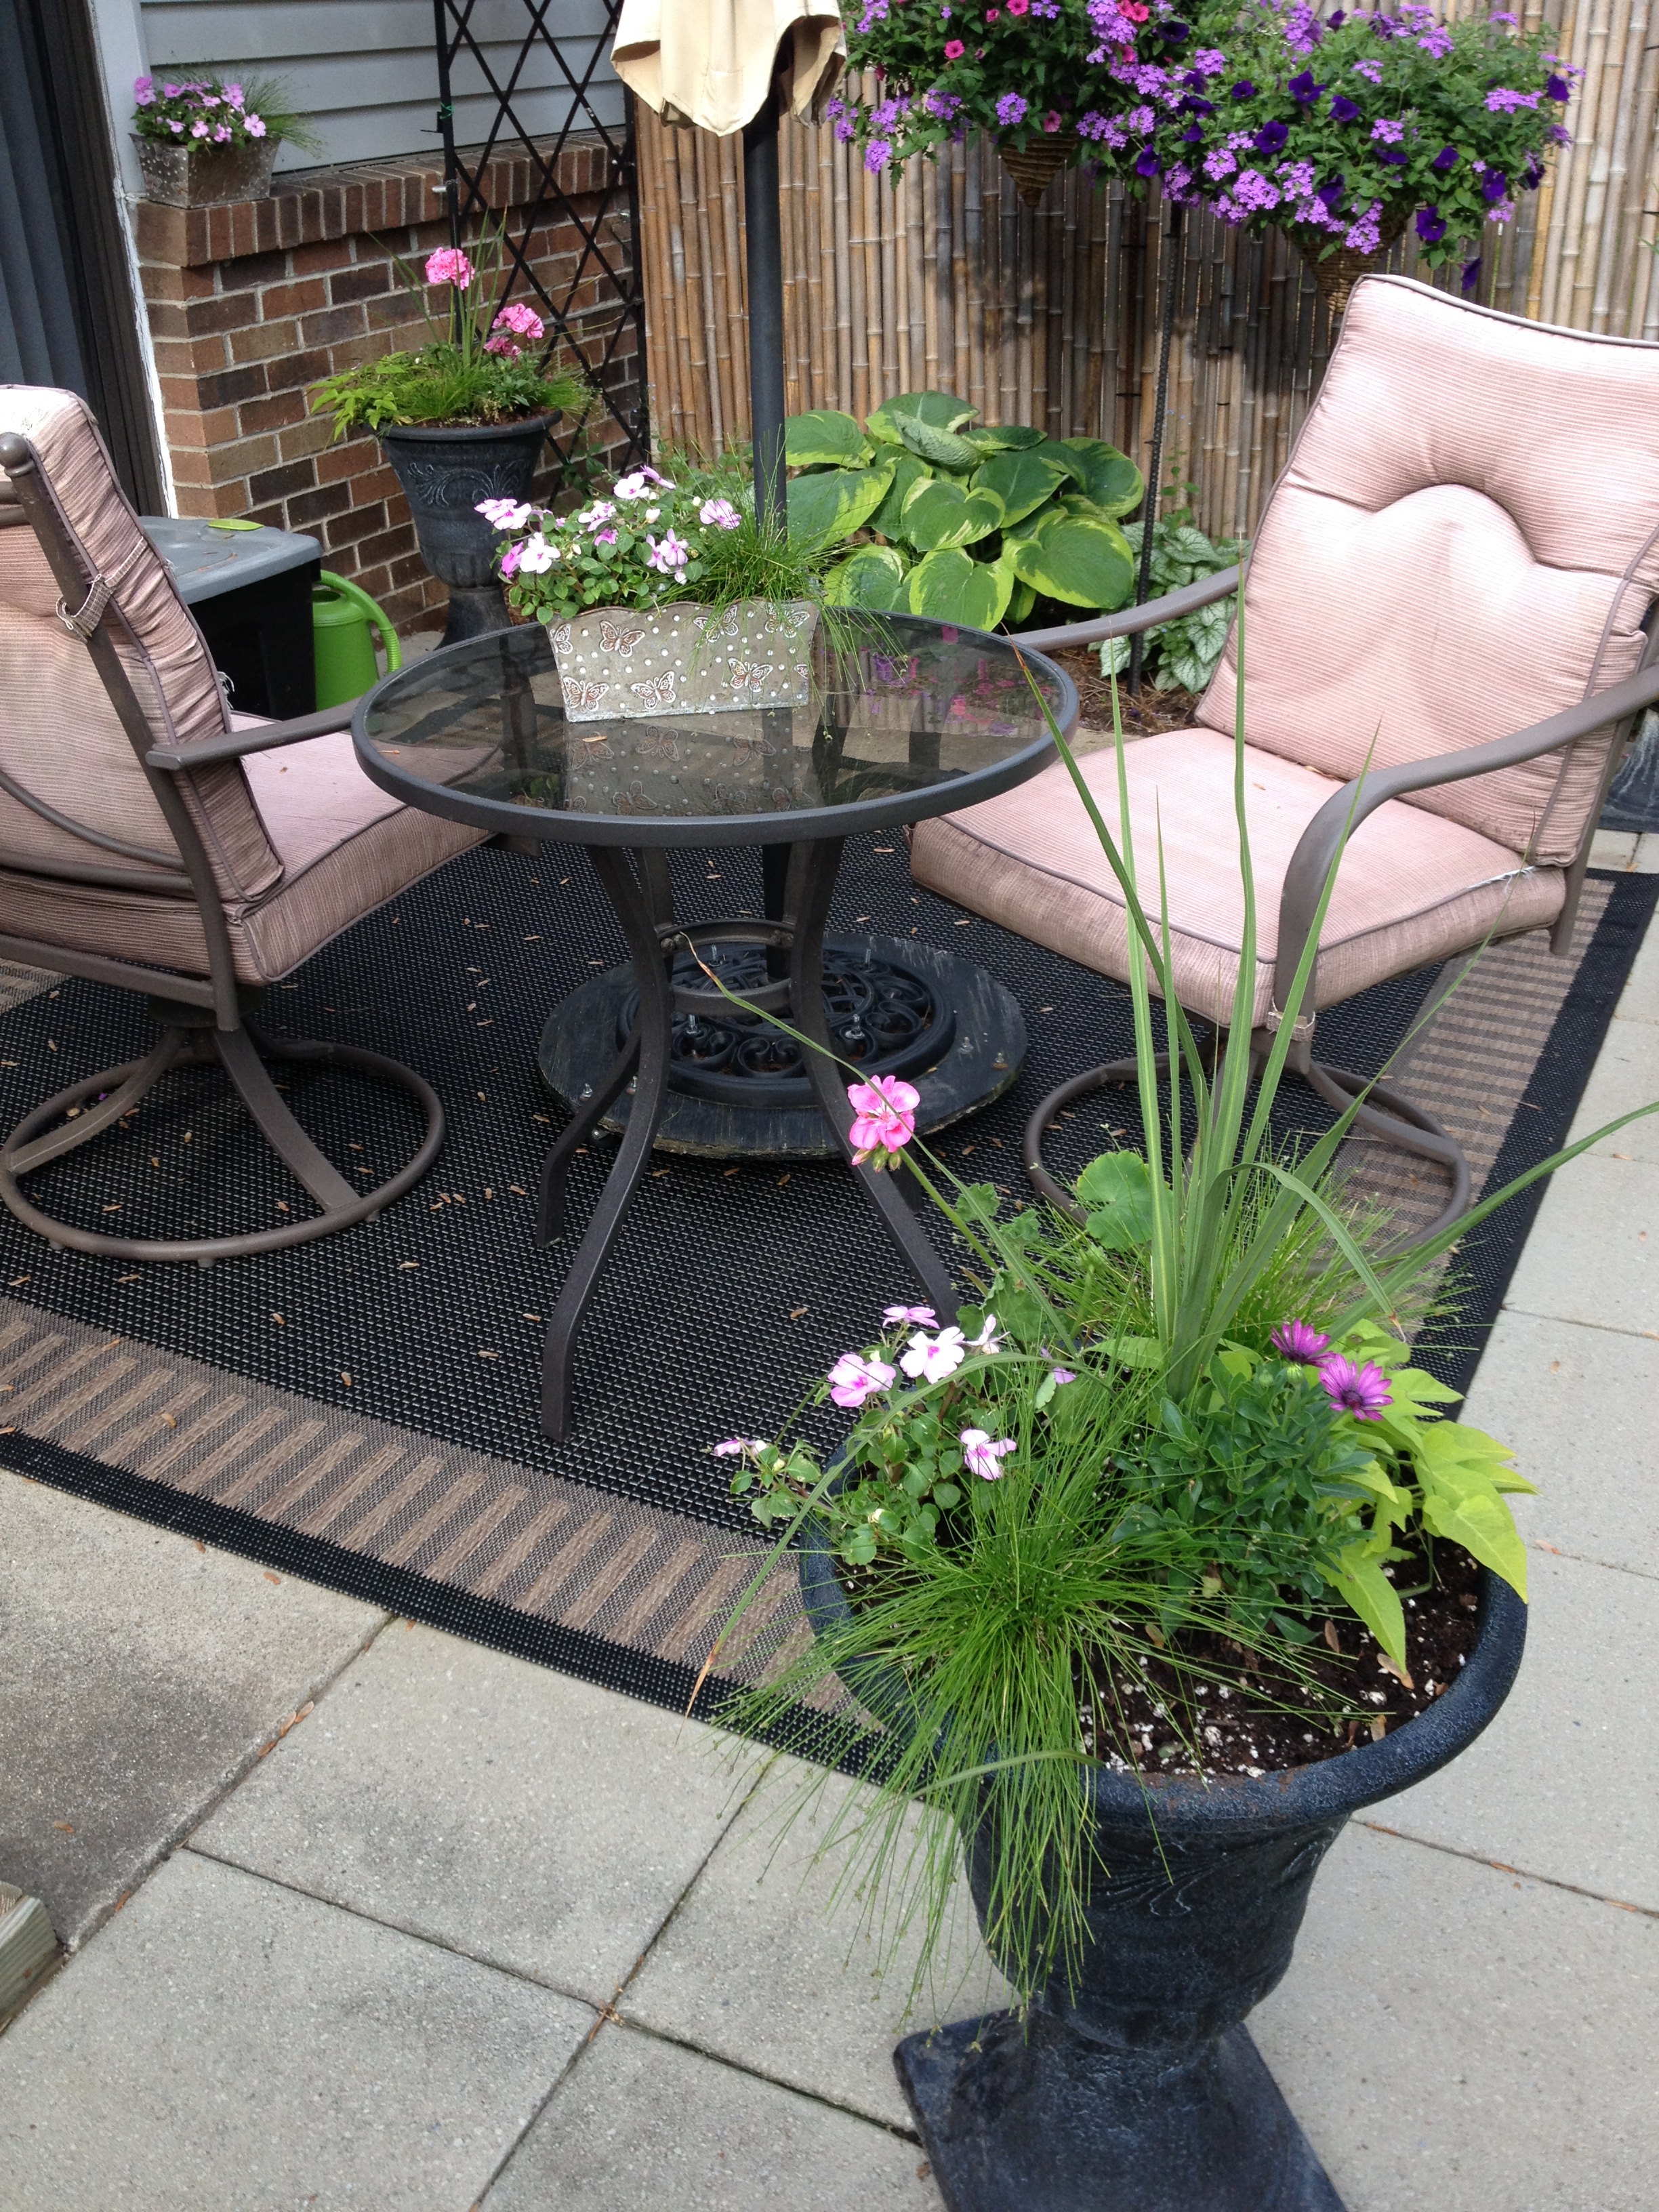 Patio with a table and two chairs near potted plants. 